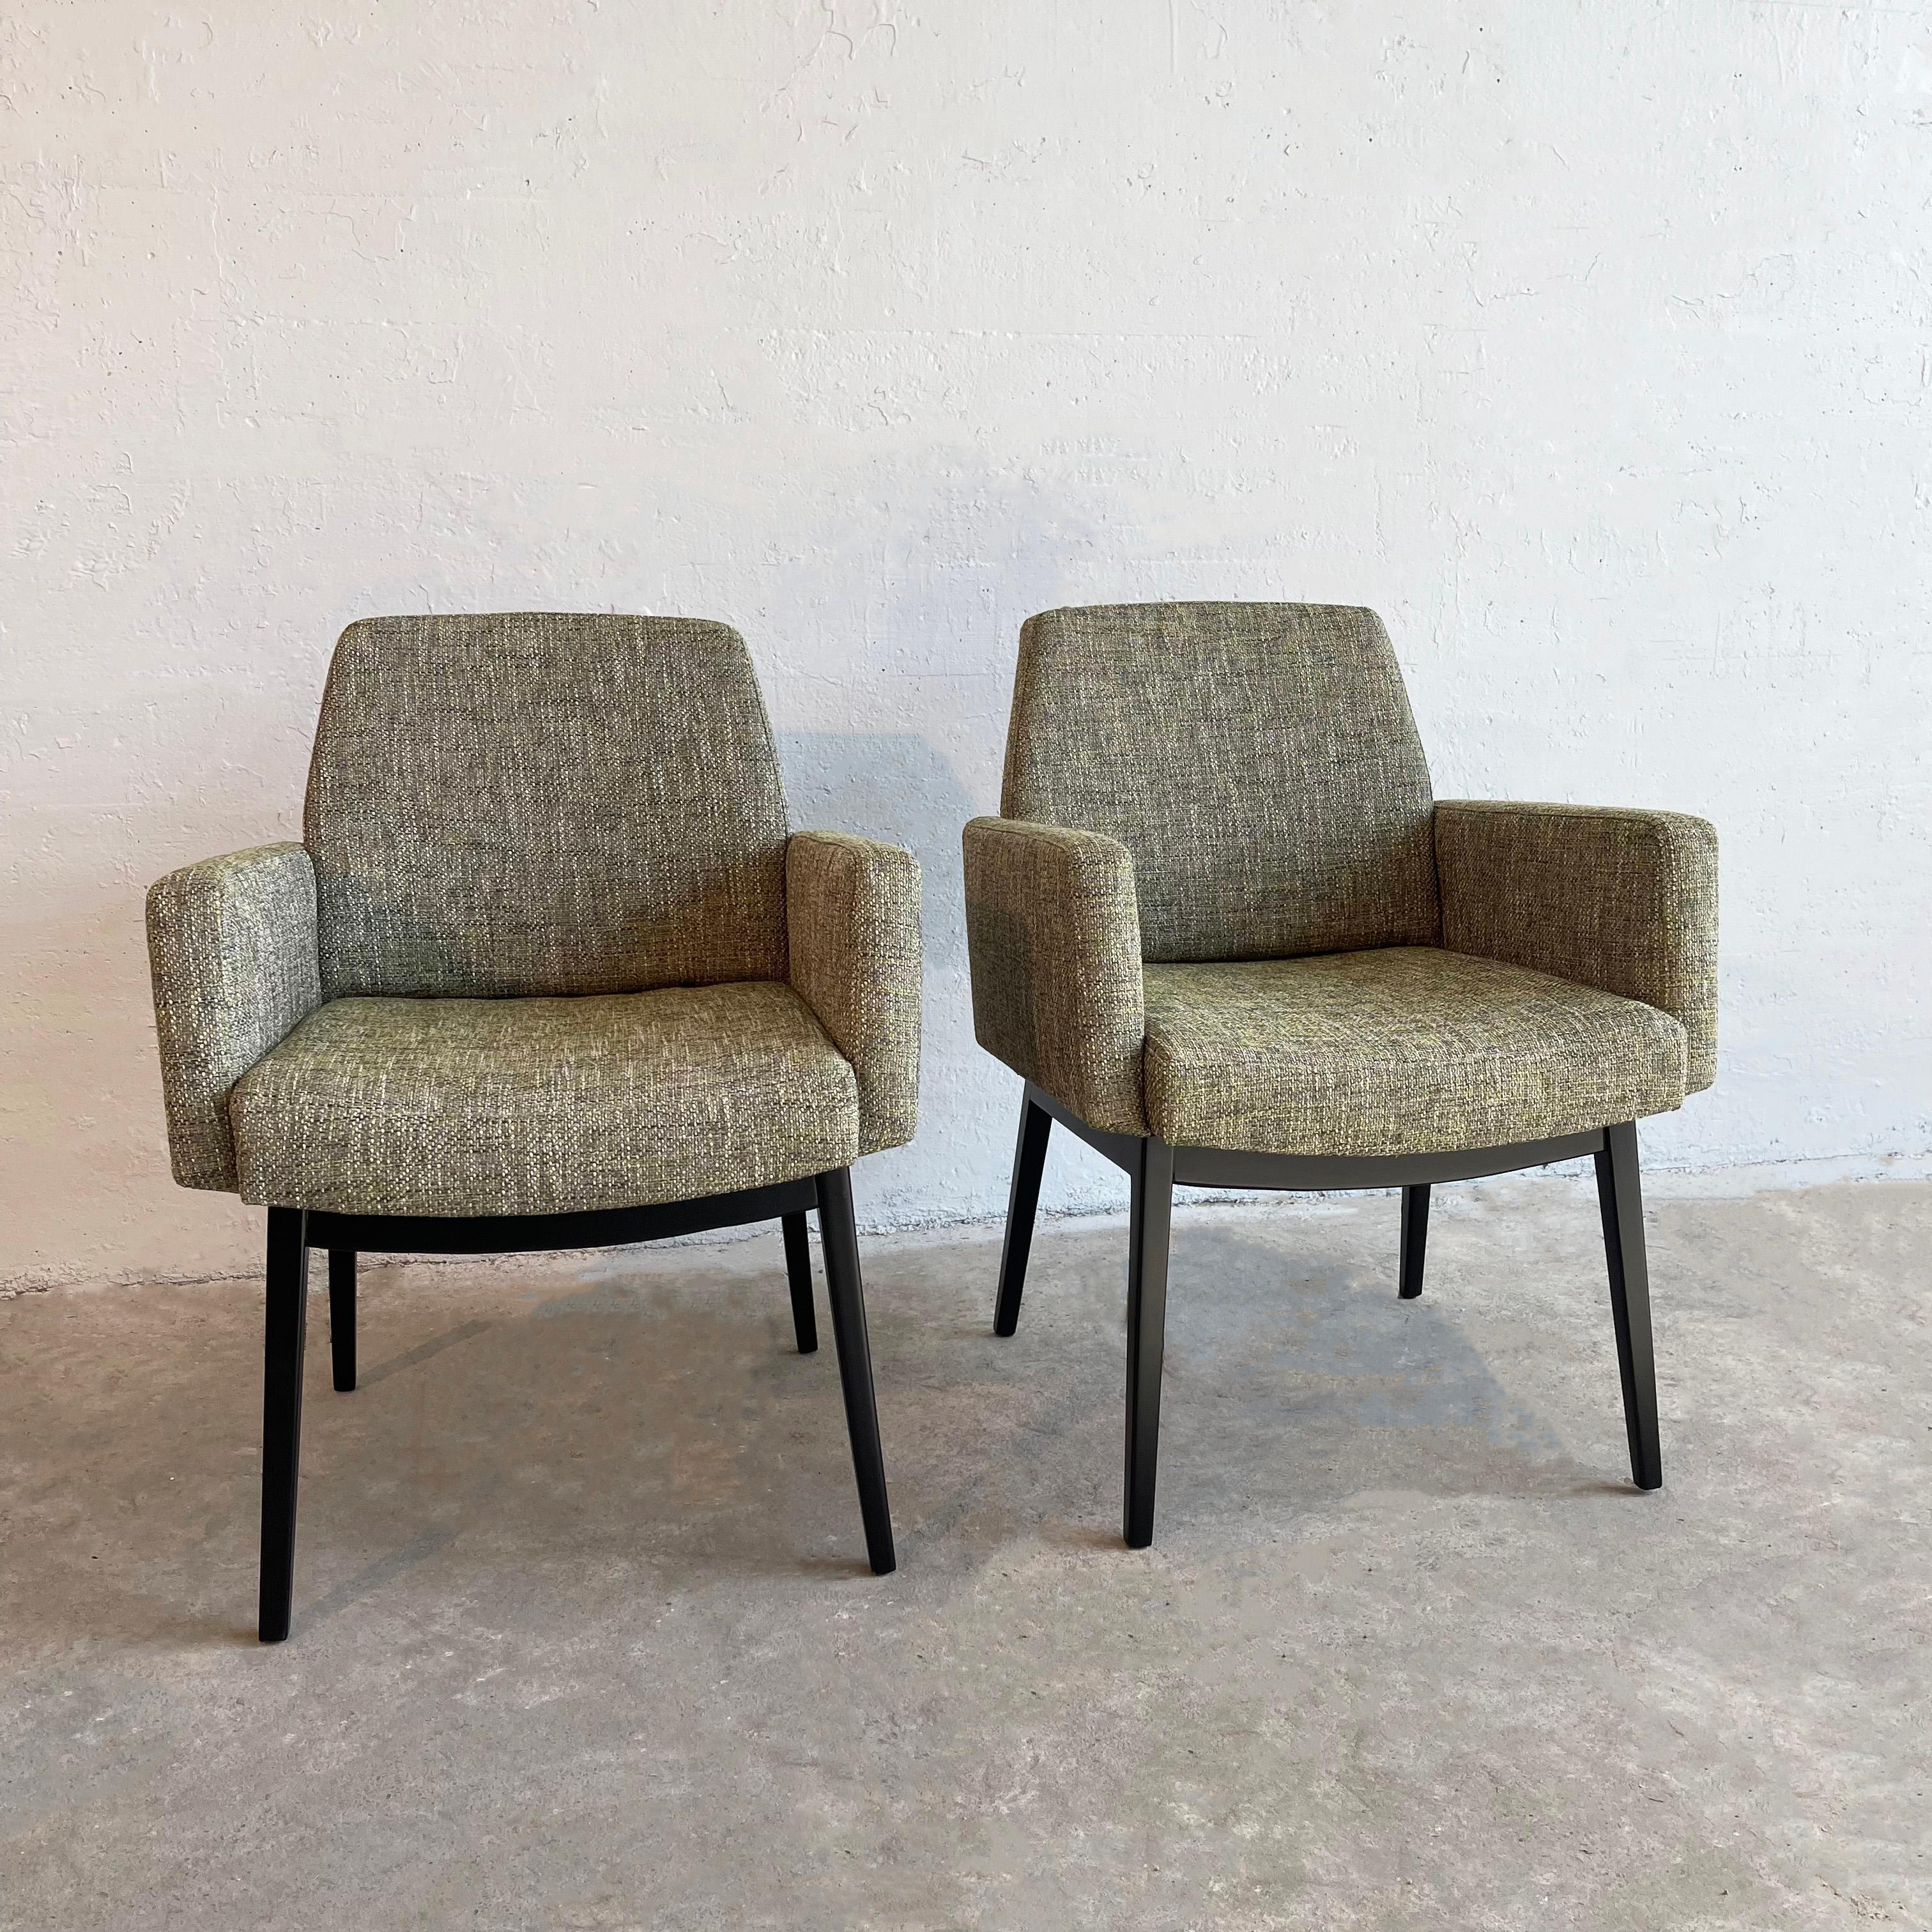 American Mid-Century Modern Upholstered Armchairs By Jens Risom For Sale